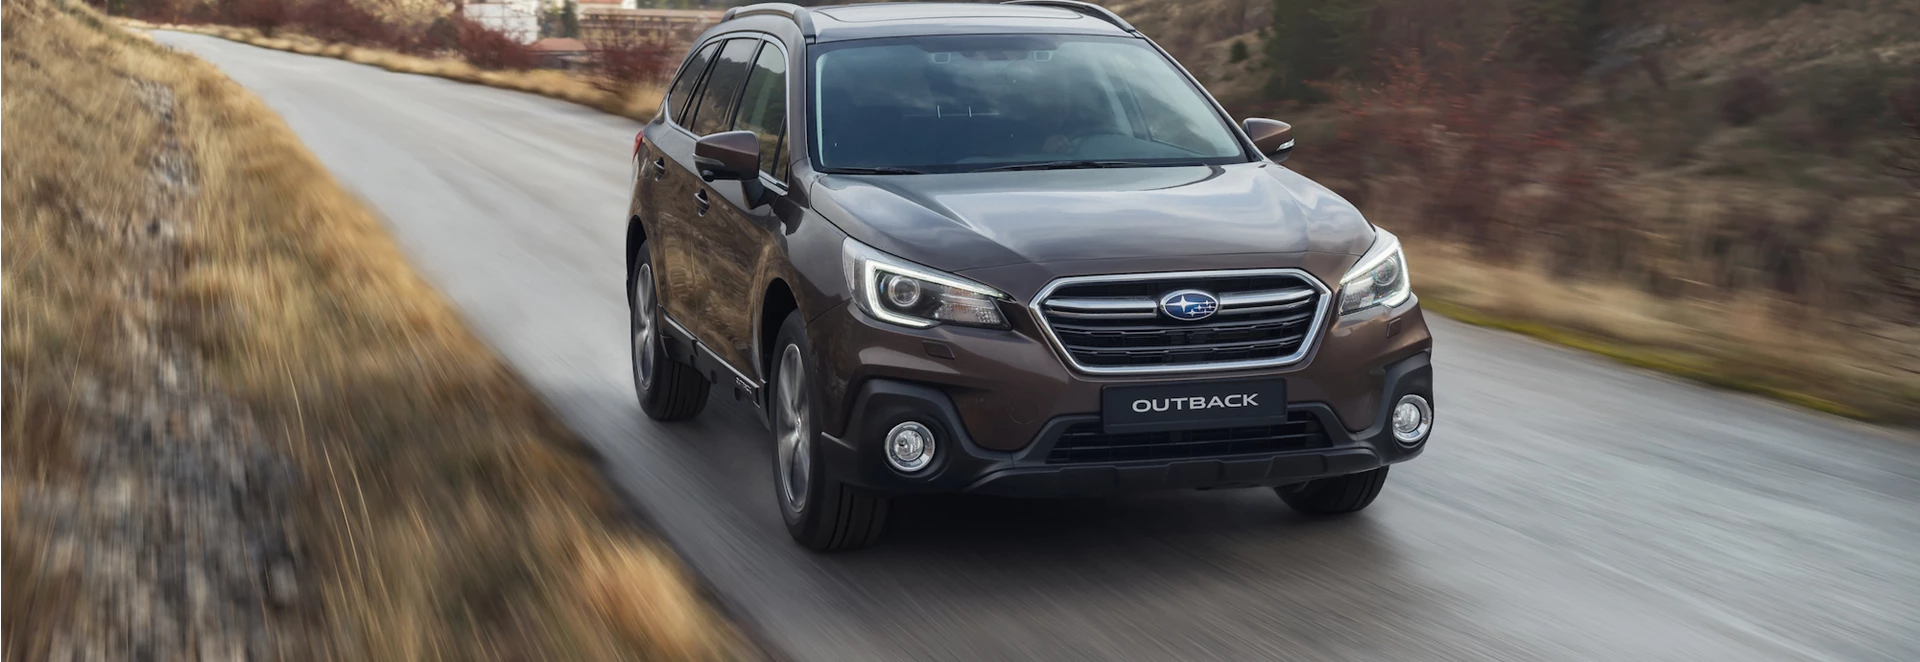 Pricing and specs revealed for the new 2018 Subaru Outback